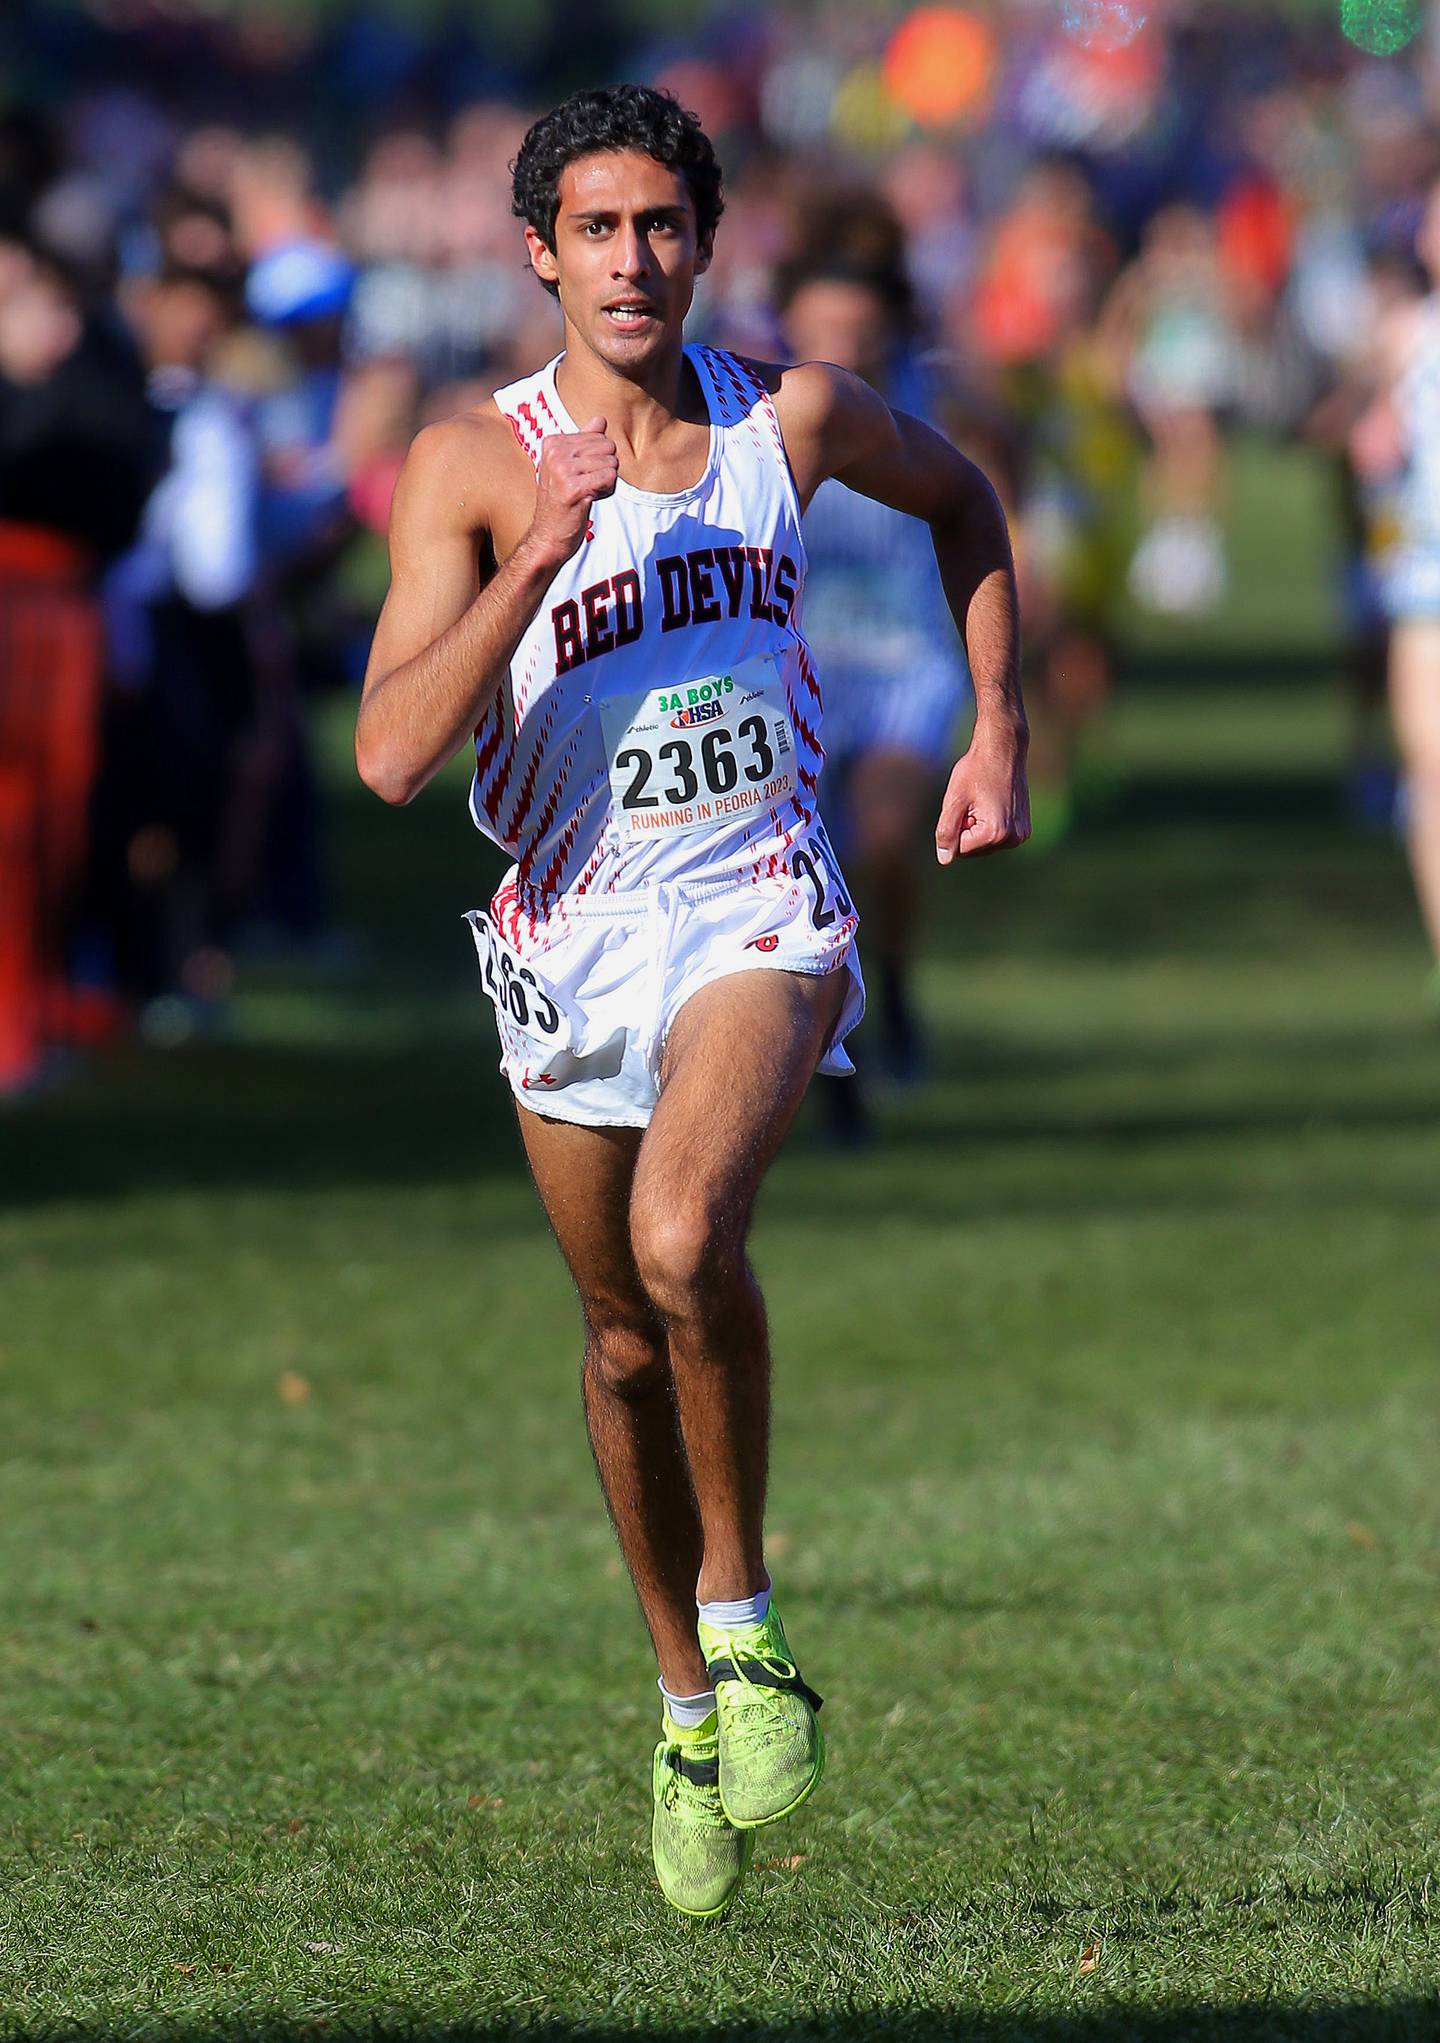 November 4, 2023 - Peoria, Illinois - Hinsdale Central's Aden Bandukwala runs to the finish line  during the Class 3A race at the IHSA State Cross Country State Finals on Saturday.  (Photo: PhotoNews Media/Clark Brooks)